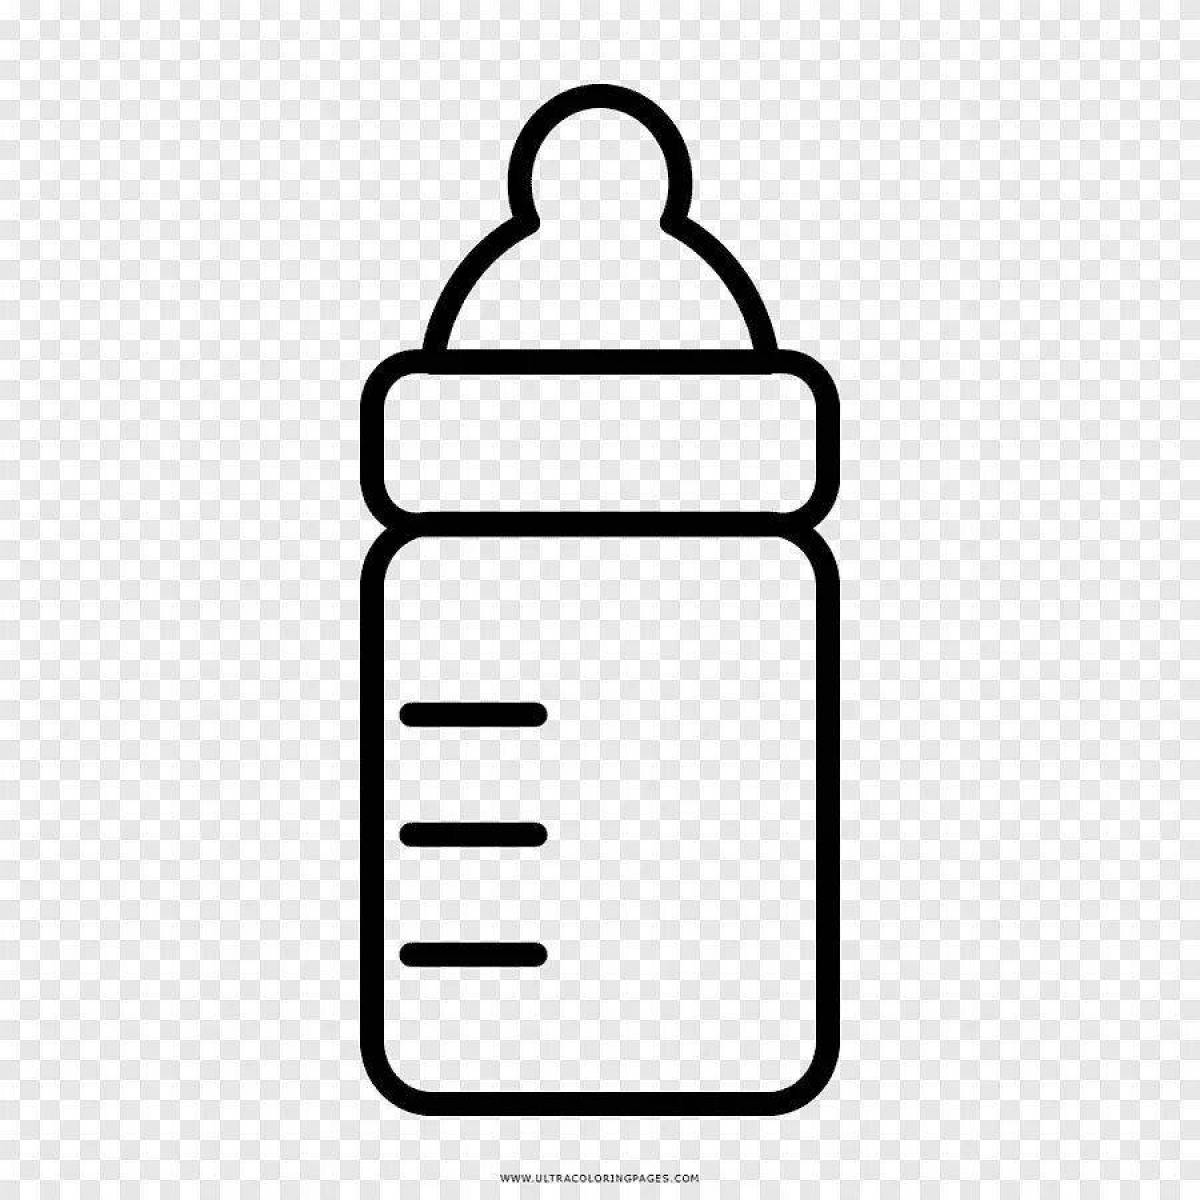 Awesome bottle coloring page